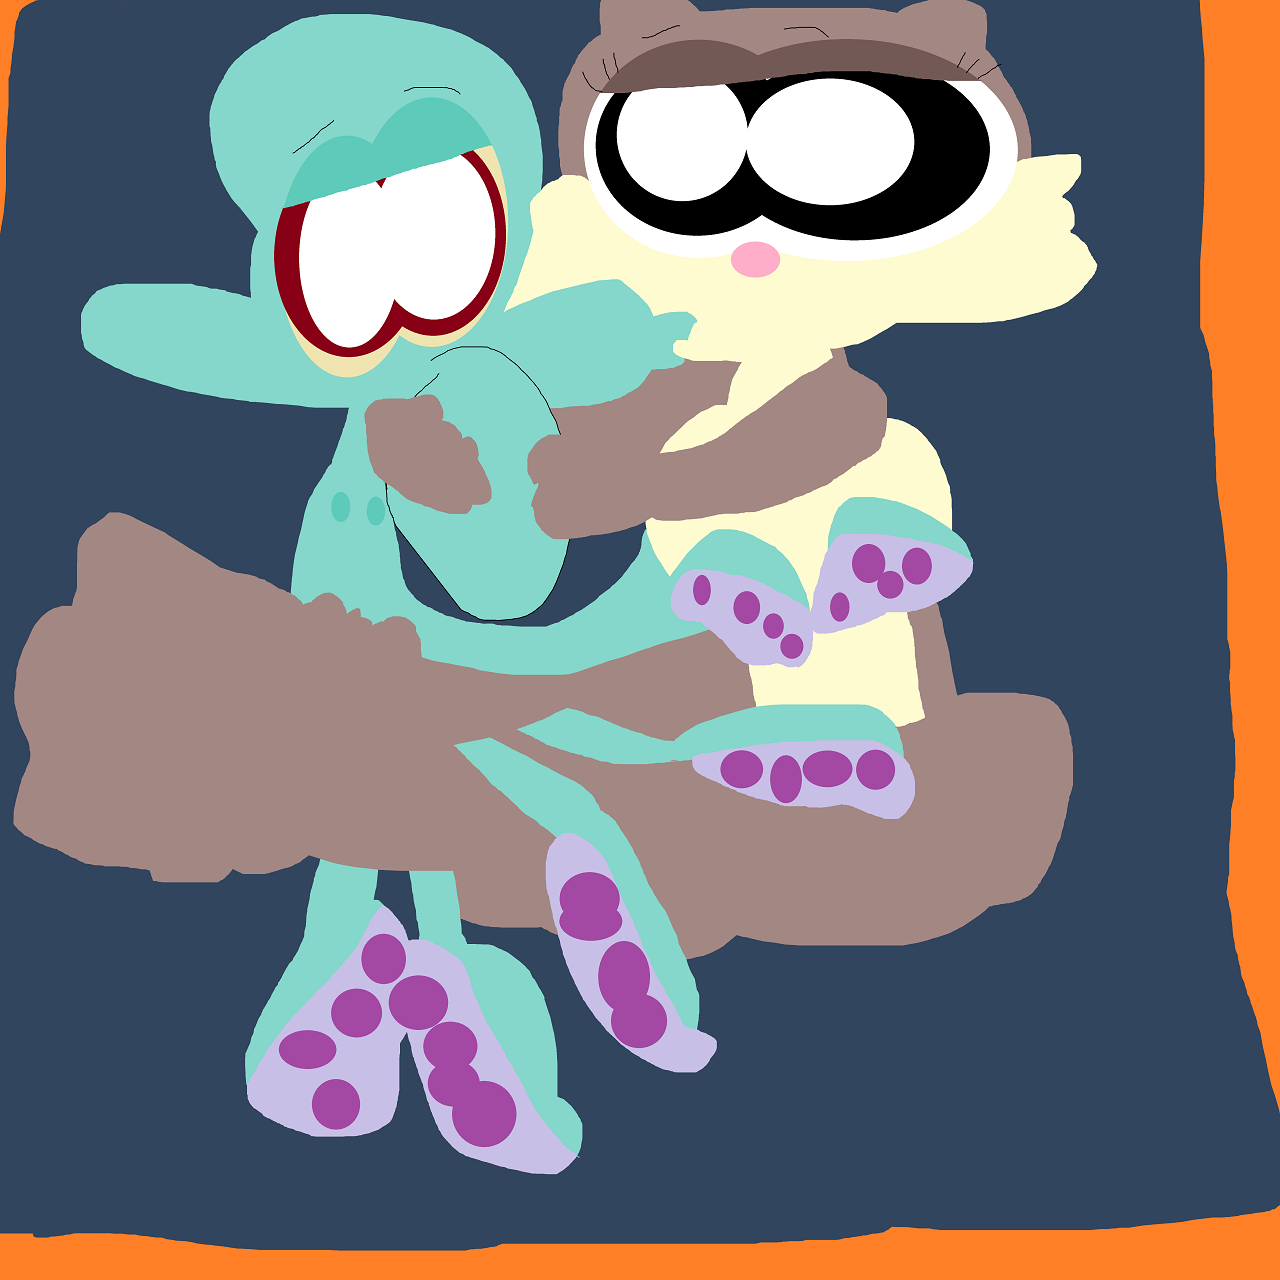 Squidward And Sandy Kissing In A Bed Again by Falconlobo